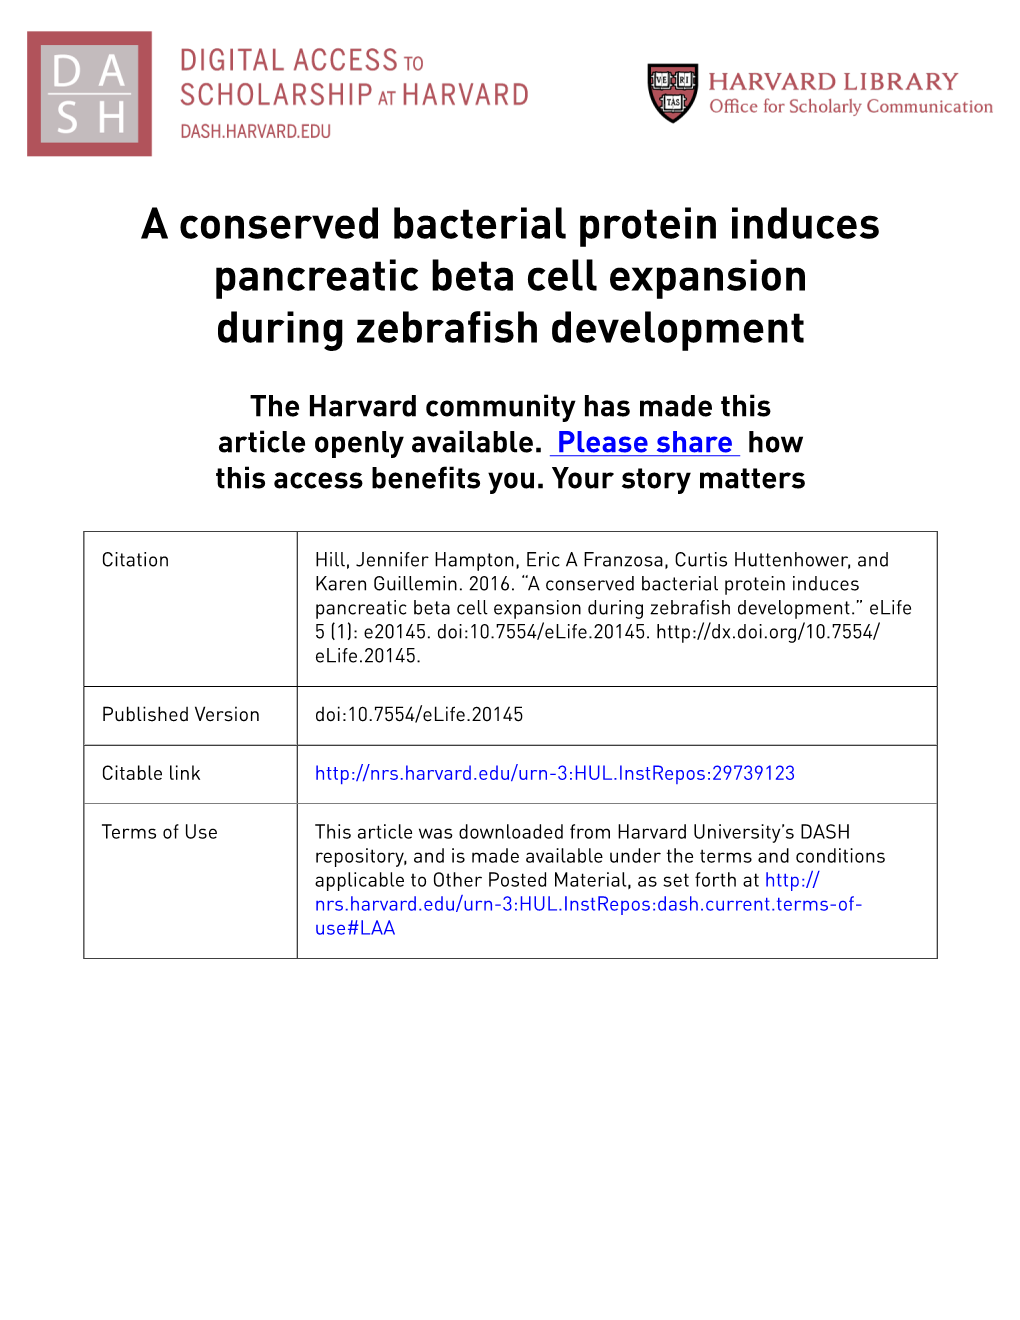 A Conserved Bacterial Protein Induces Pancreatic Beta Cell Expansion During Zebrafish Development